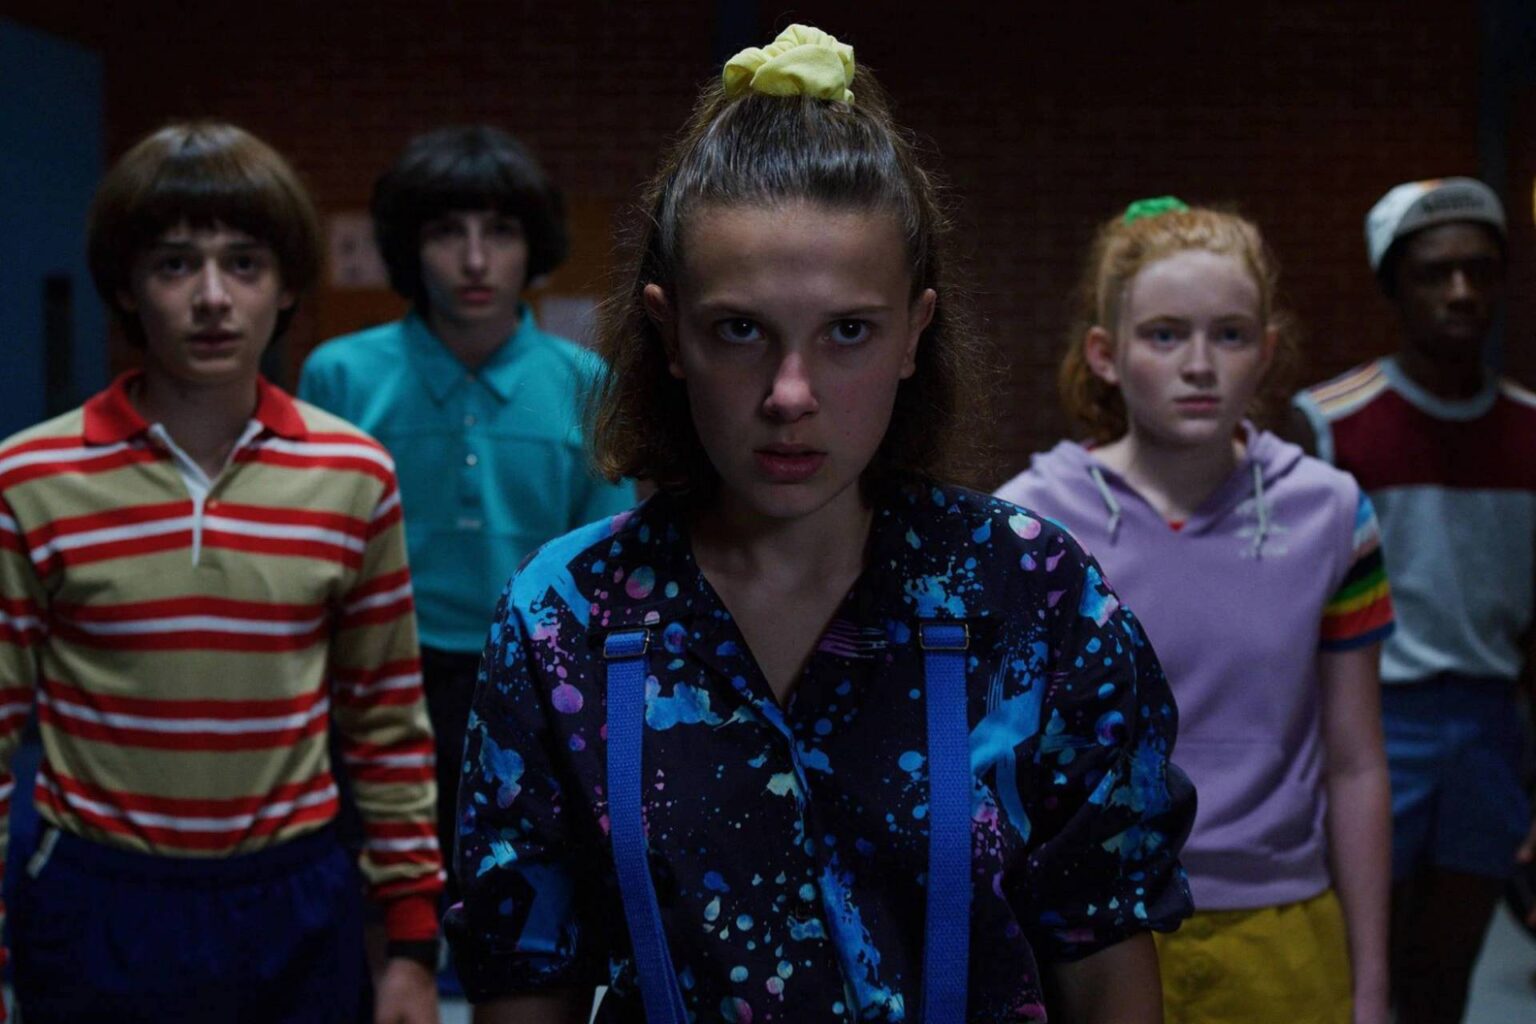 Get your Eggos ready for another binging session gearing up for 'Stranger Things' season 4. Did Netflix leak the release date?